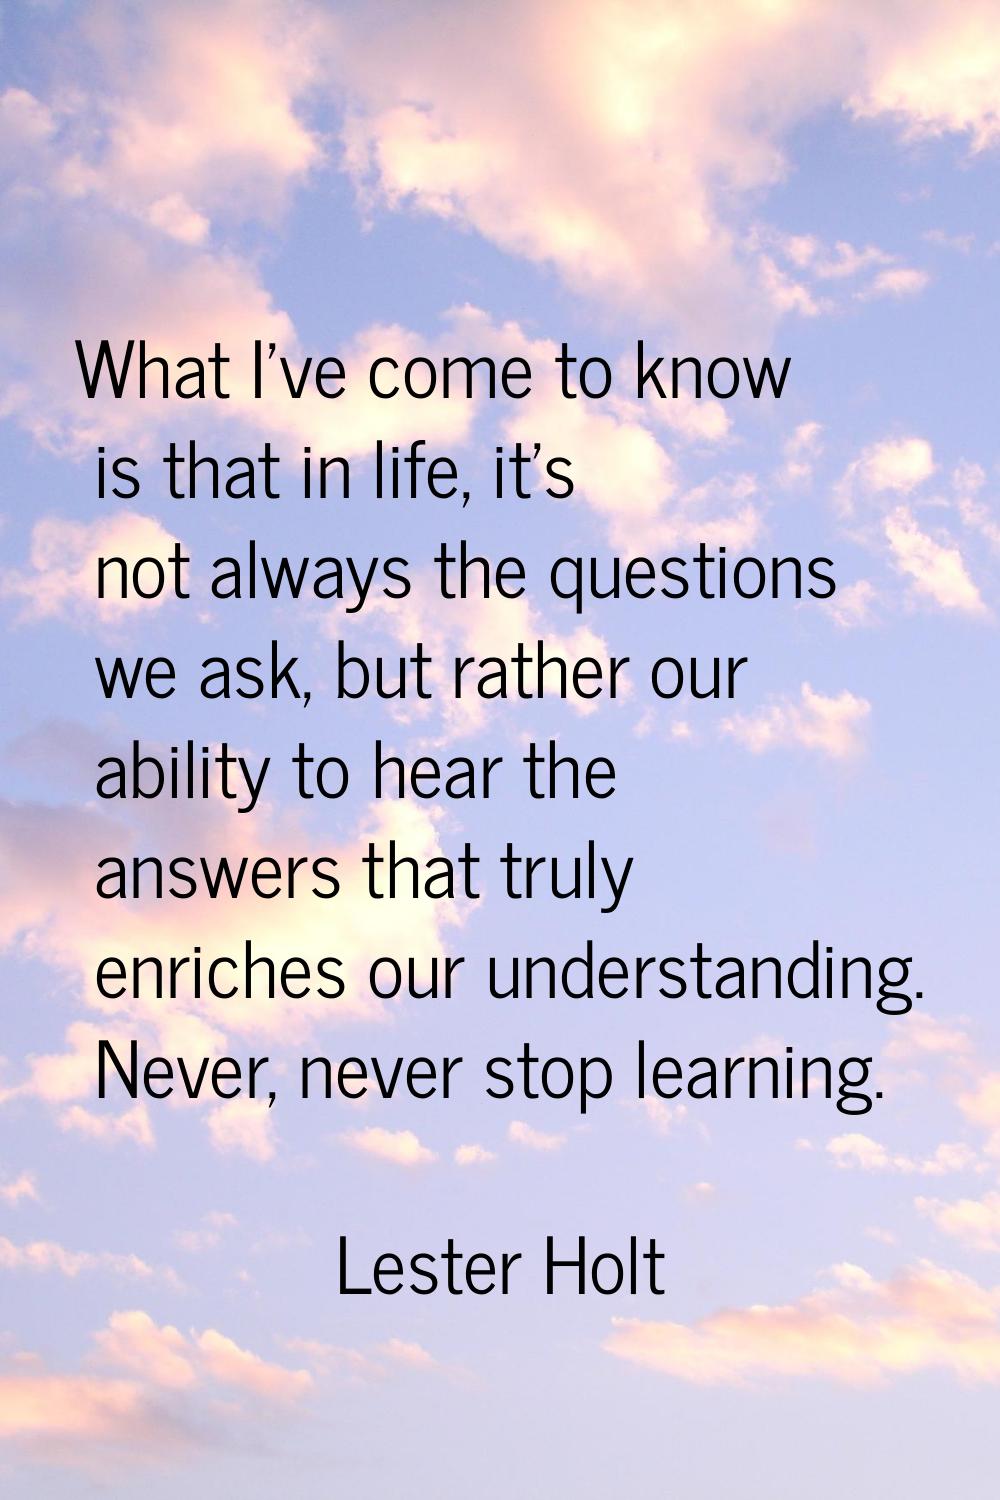 What I've come to know is that in life, it's not always the questions we ask, but rather our abilit